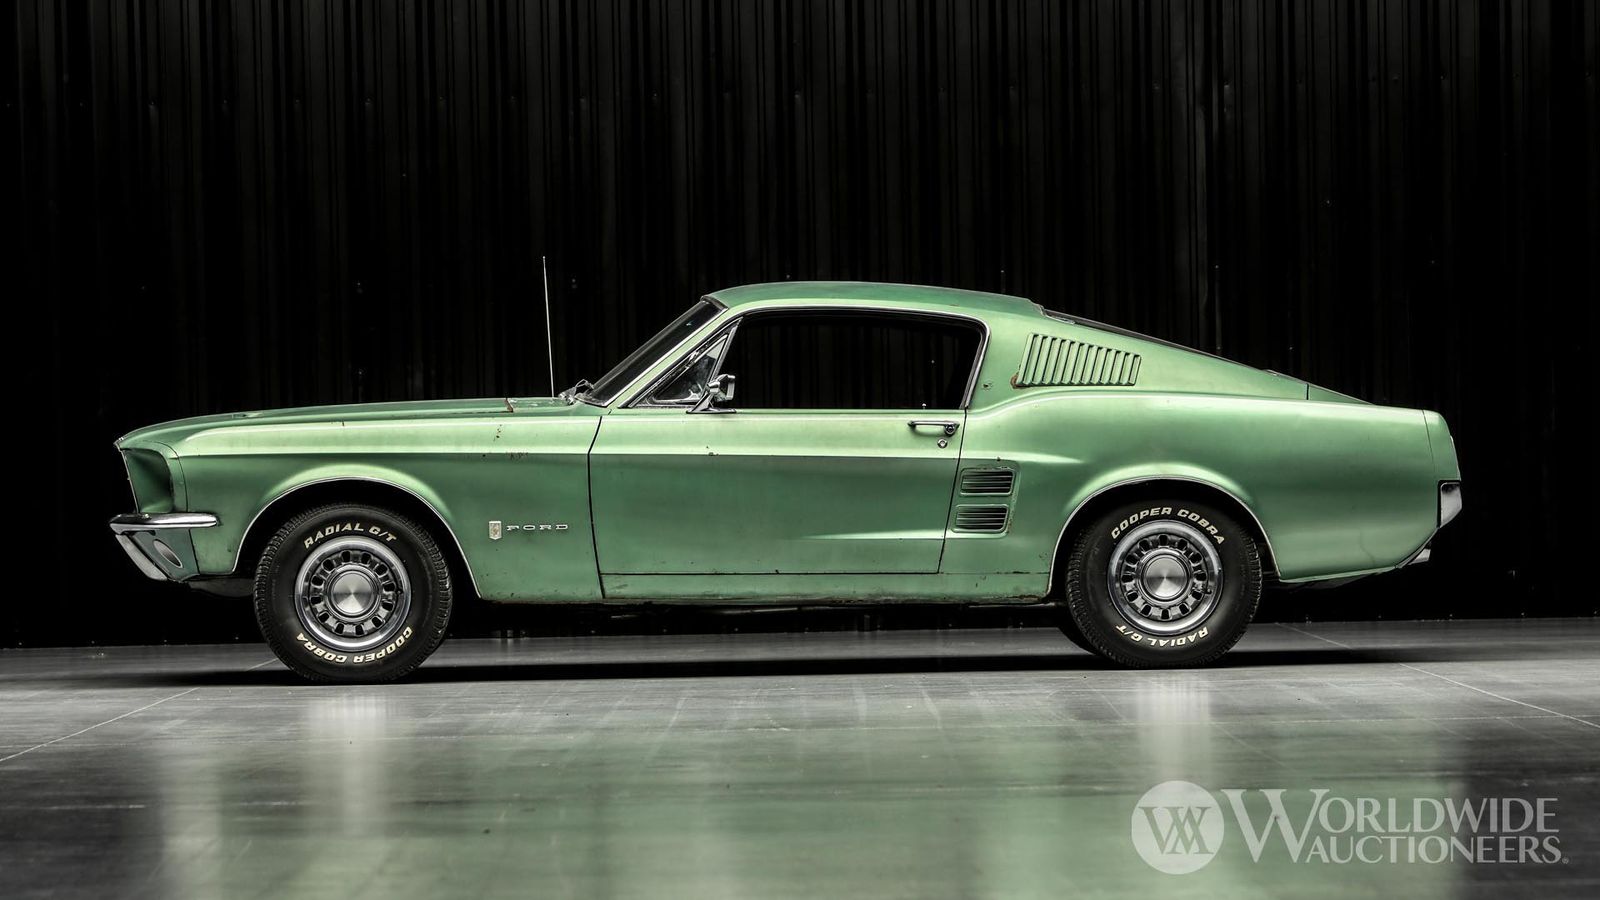 Rare 'Vietnam' Mustang Owned By Dennis Collins